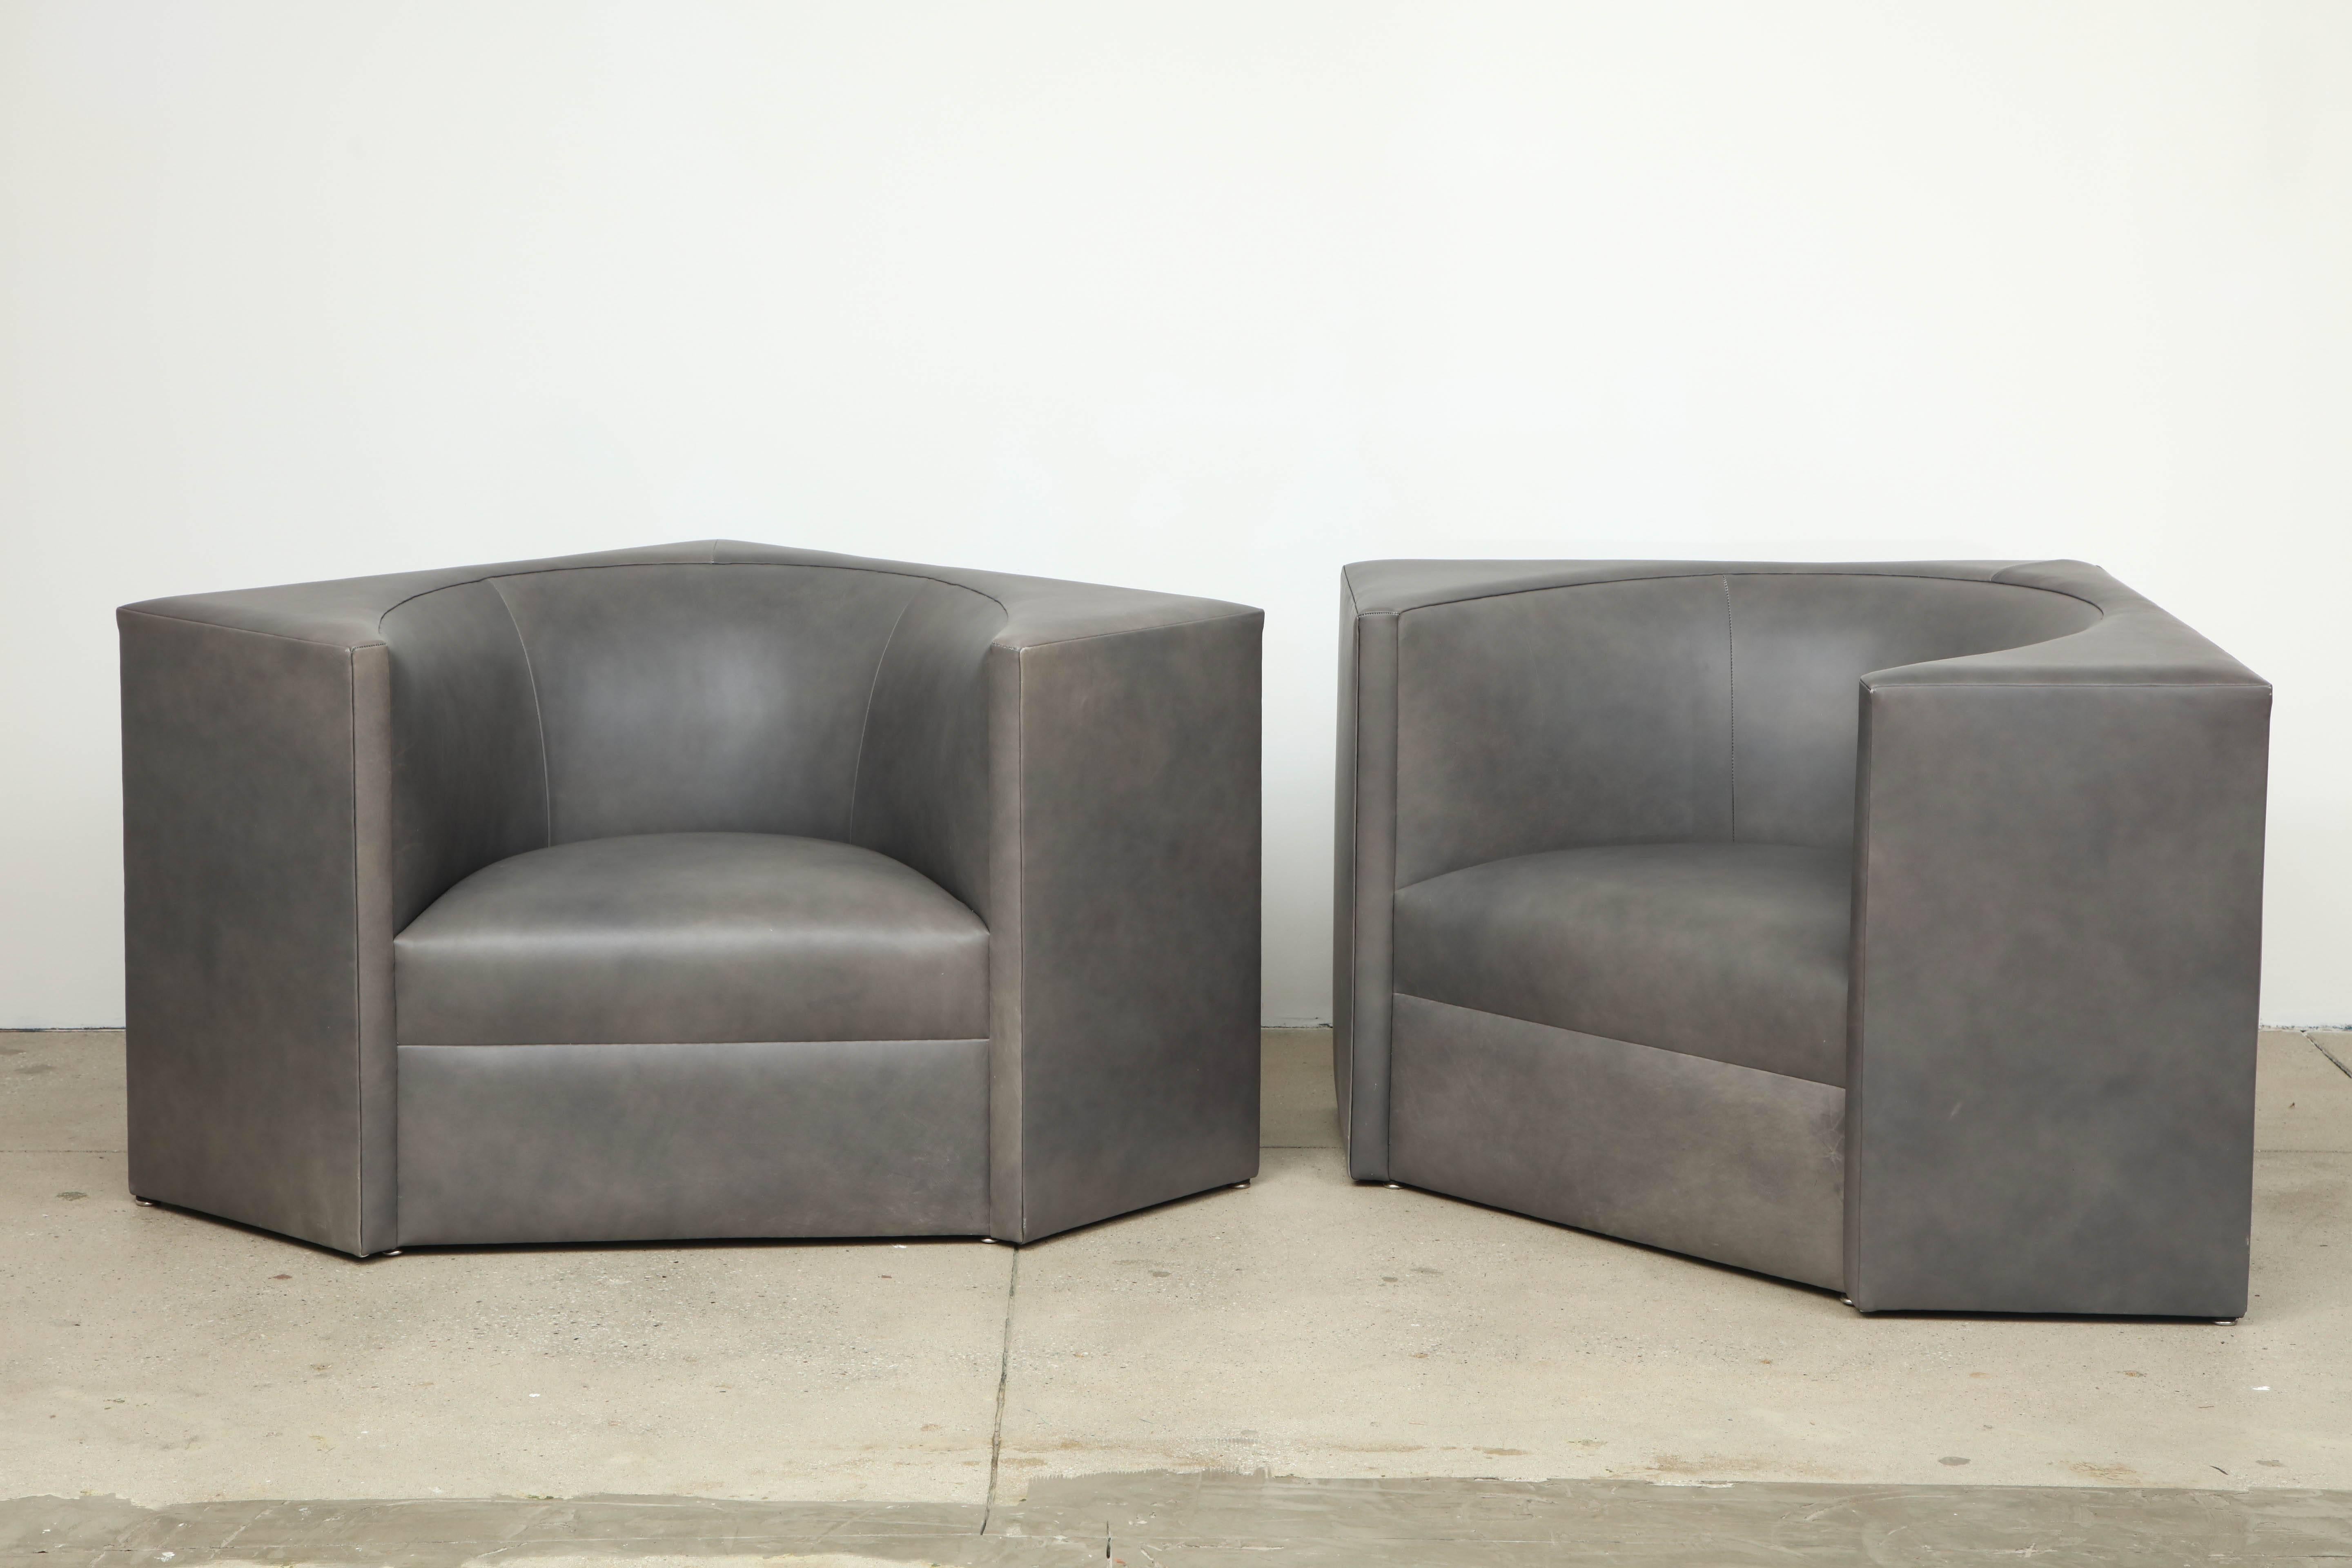 Pair of 1970s Cubic leather chairs.
The chairs have wonderful angled lines and they have been newly reupholstered in a soft medium slate gray leather.
 